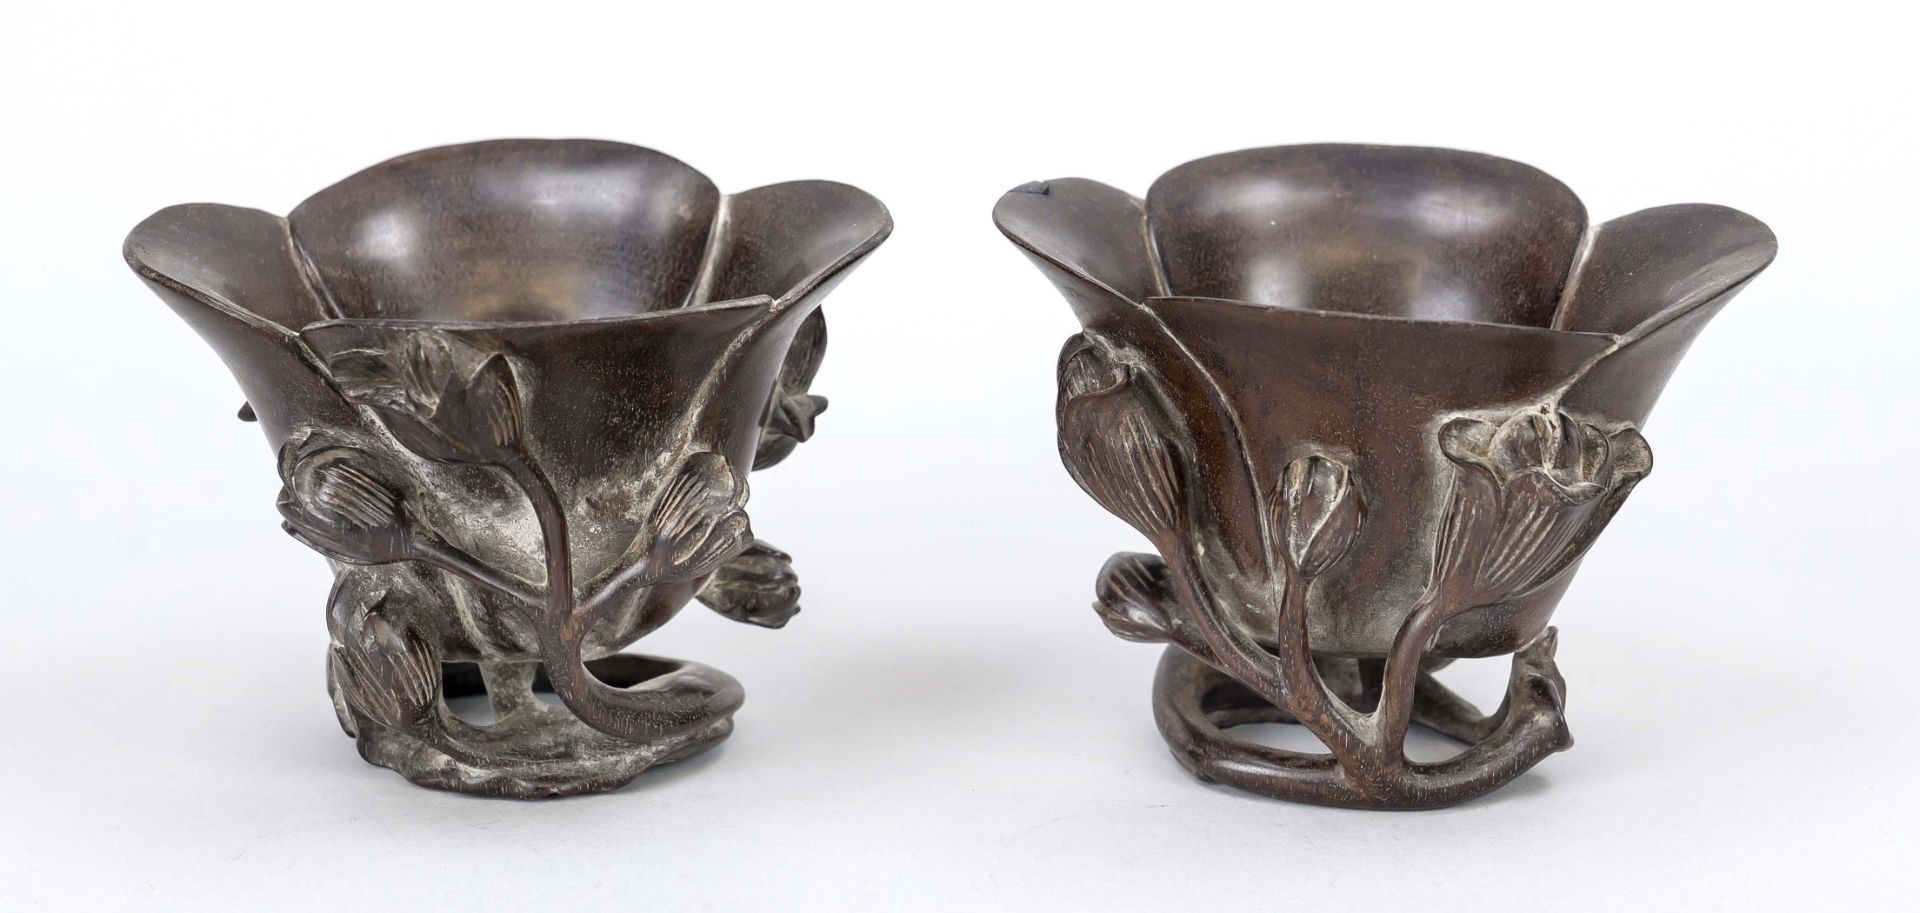 Pair of libation cups, China 19th century (Qing). Carved from dark, finely grained hardwood (